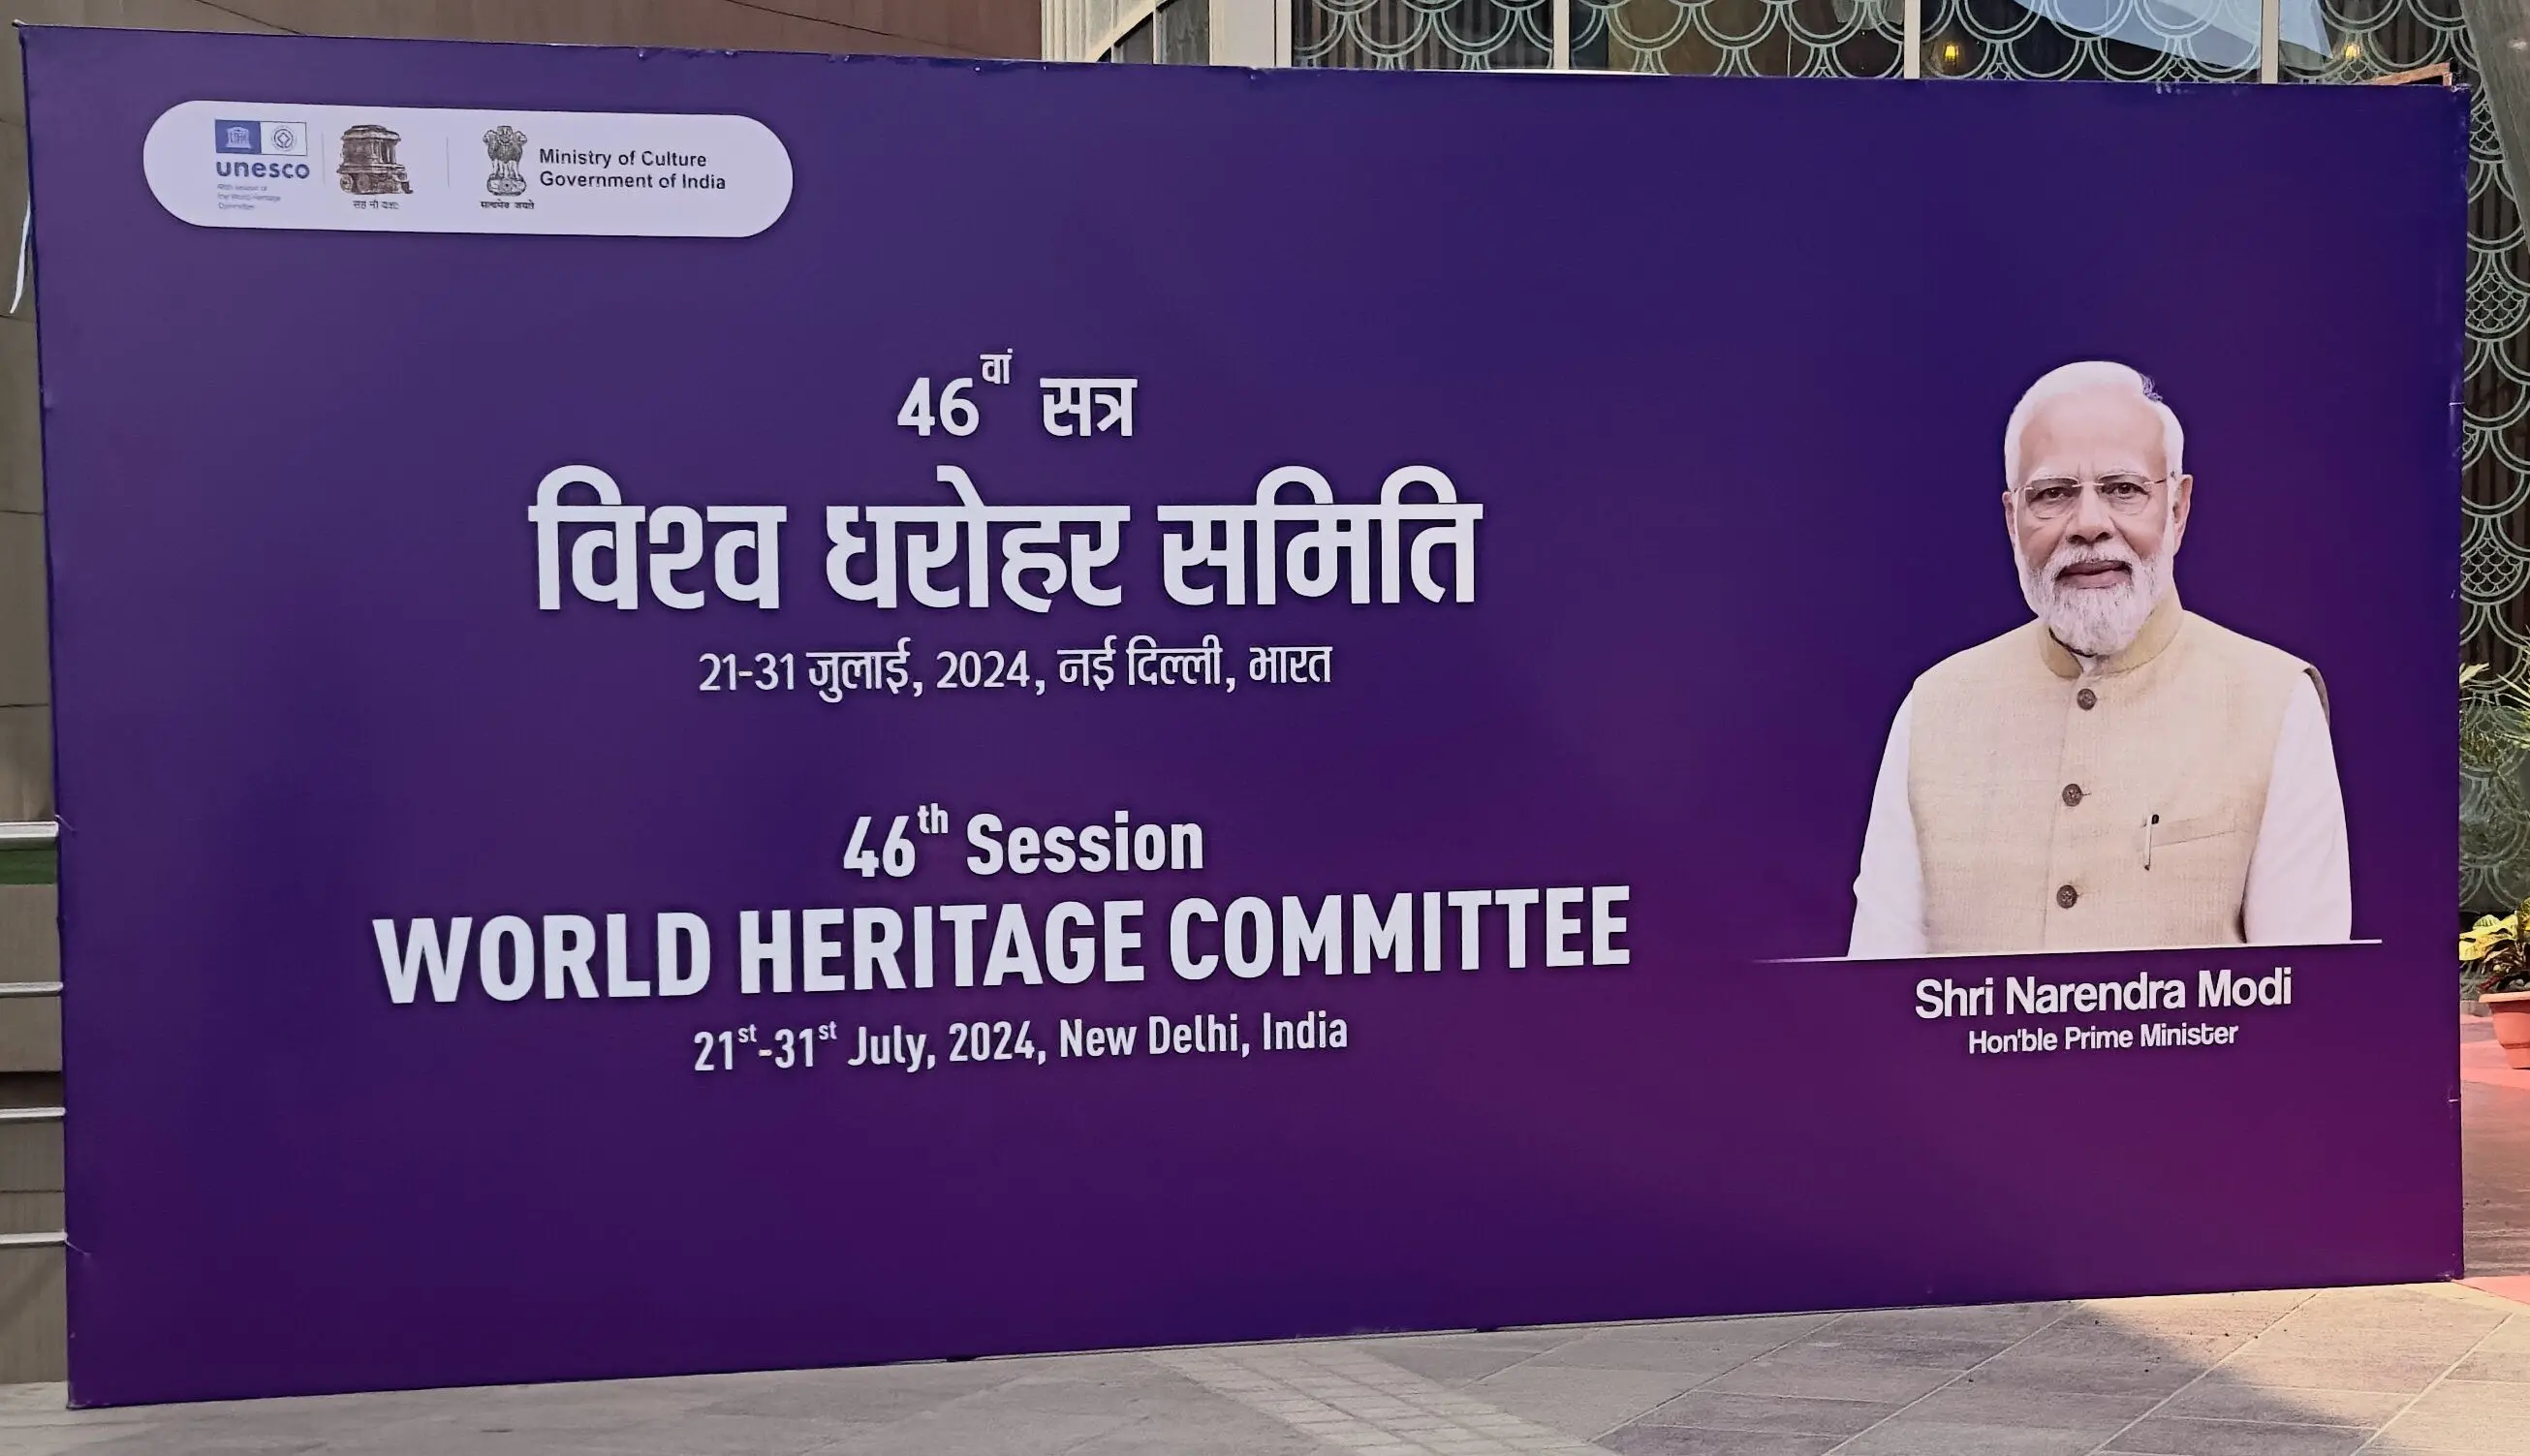 46th session of the World Heritage Committee